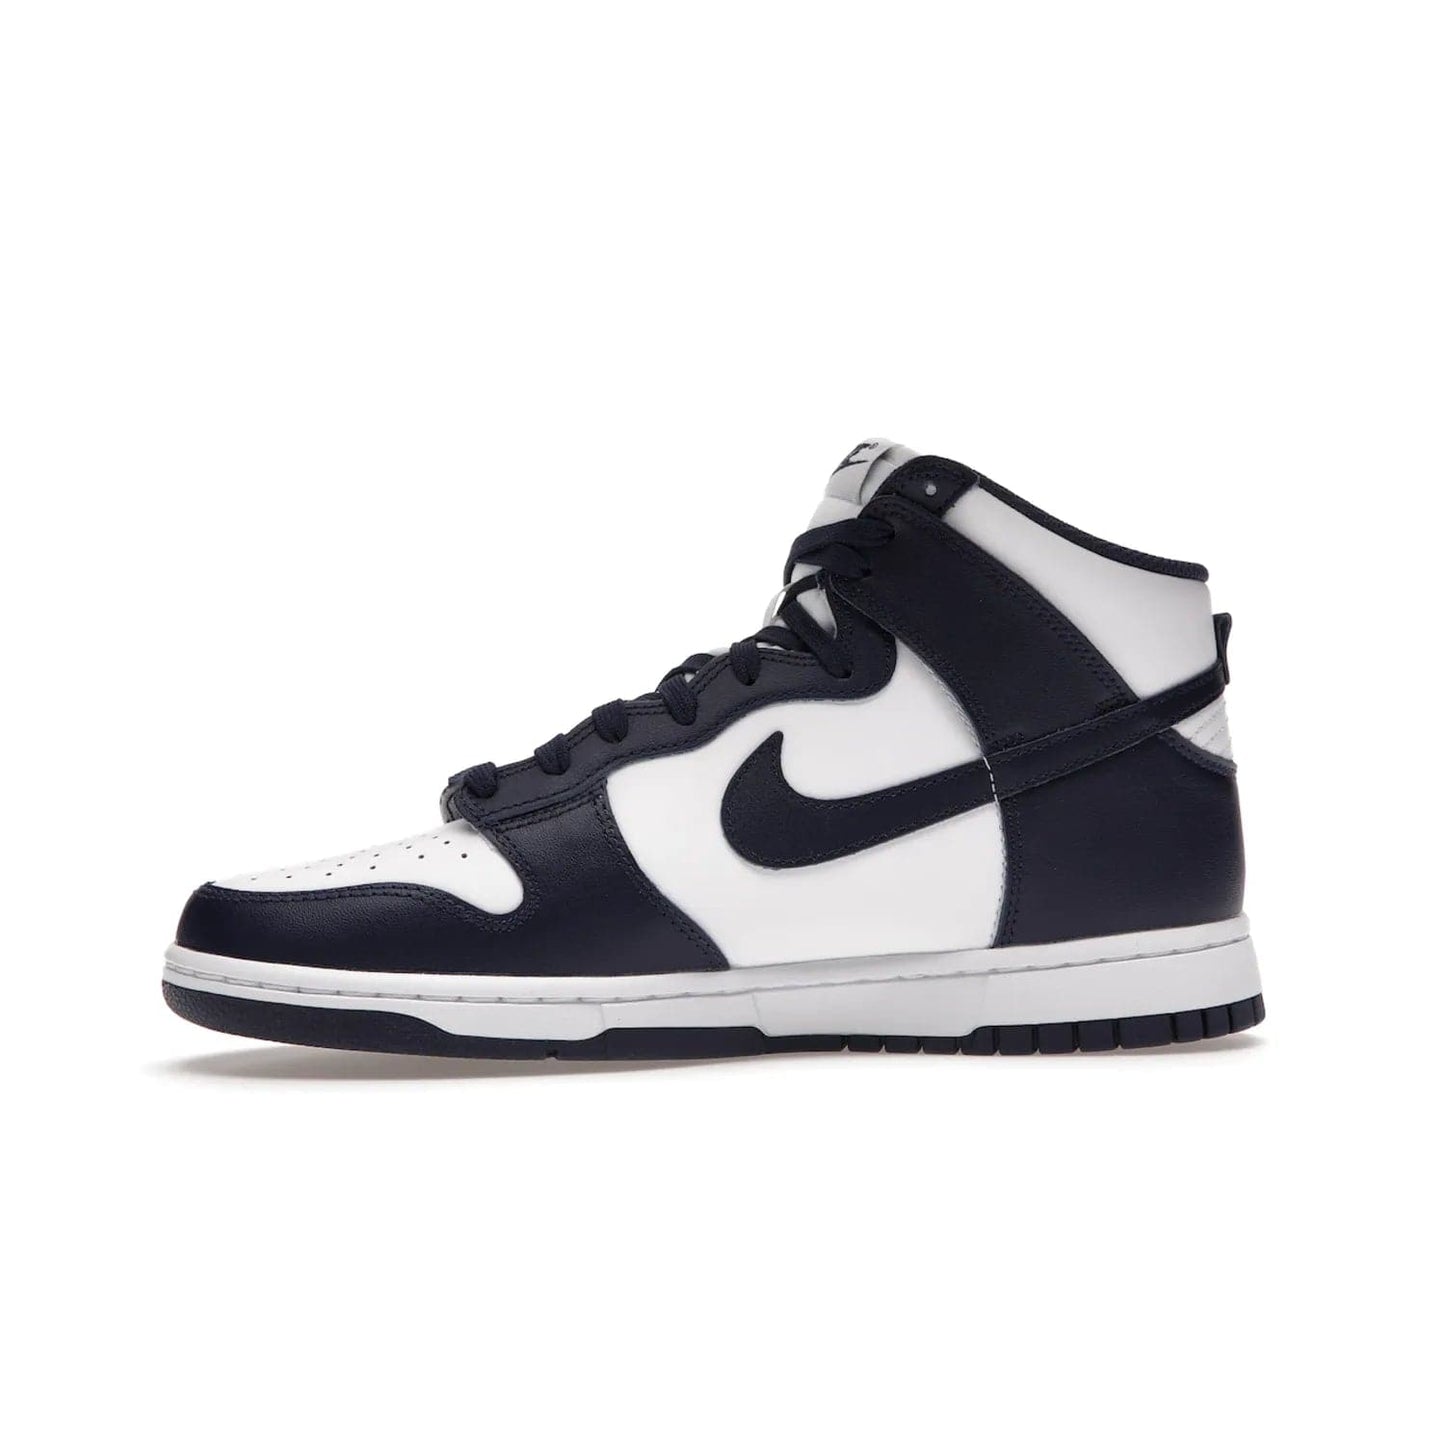 Nike Dunk High Championship Navy - Image 18 - Only at www.BallersClubKickz.com - Classic athletic style meets striking color-blocking on the Nike Dunk High Championship Navy. A white leather upper with Championship Navy overlays creates a retro look with a woven tongue label and sole. Unleash your inner champion with the Nike Dunk High Championship Navy.